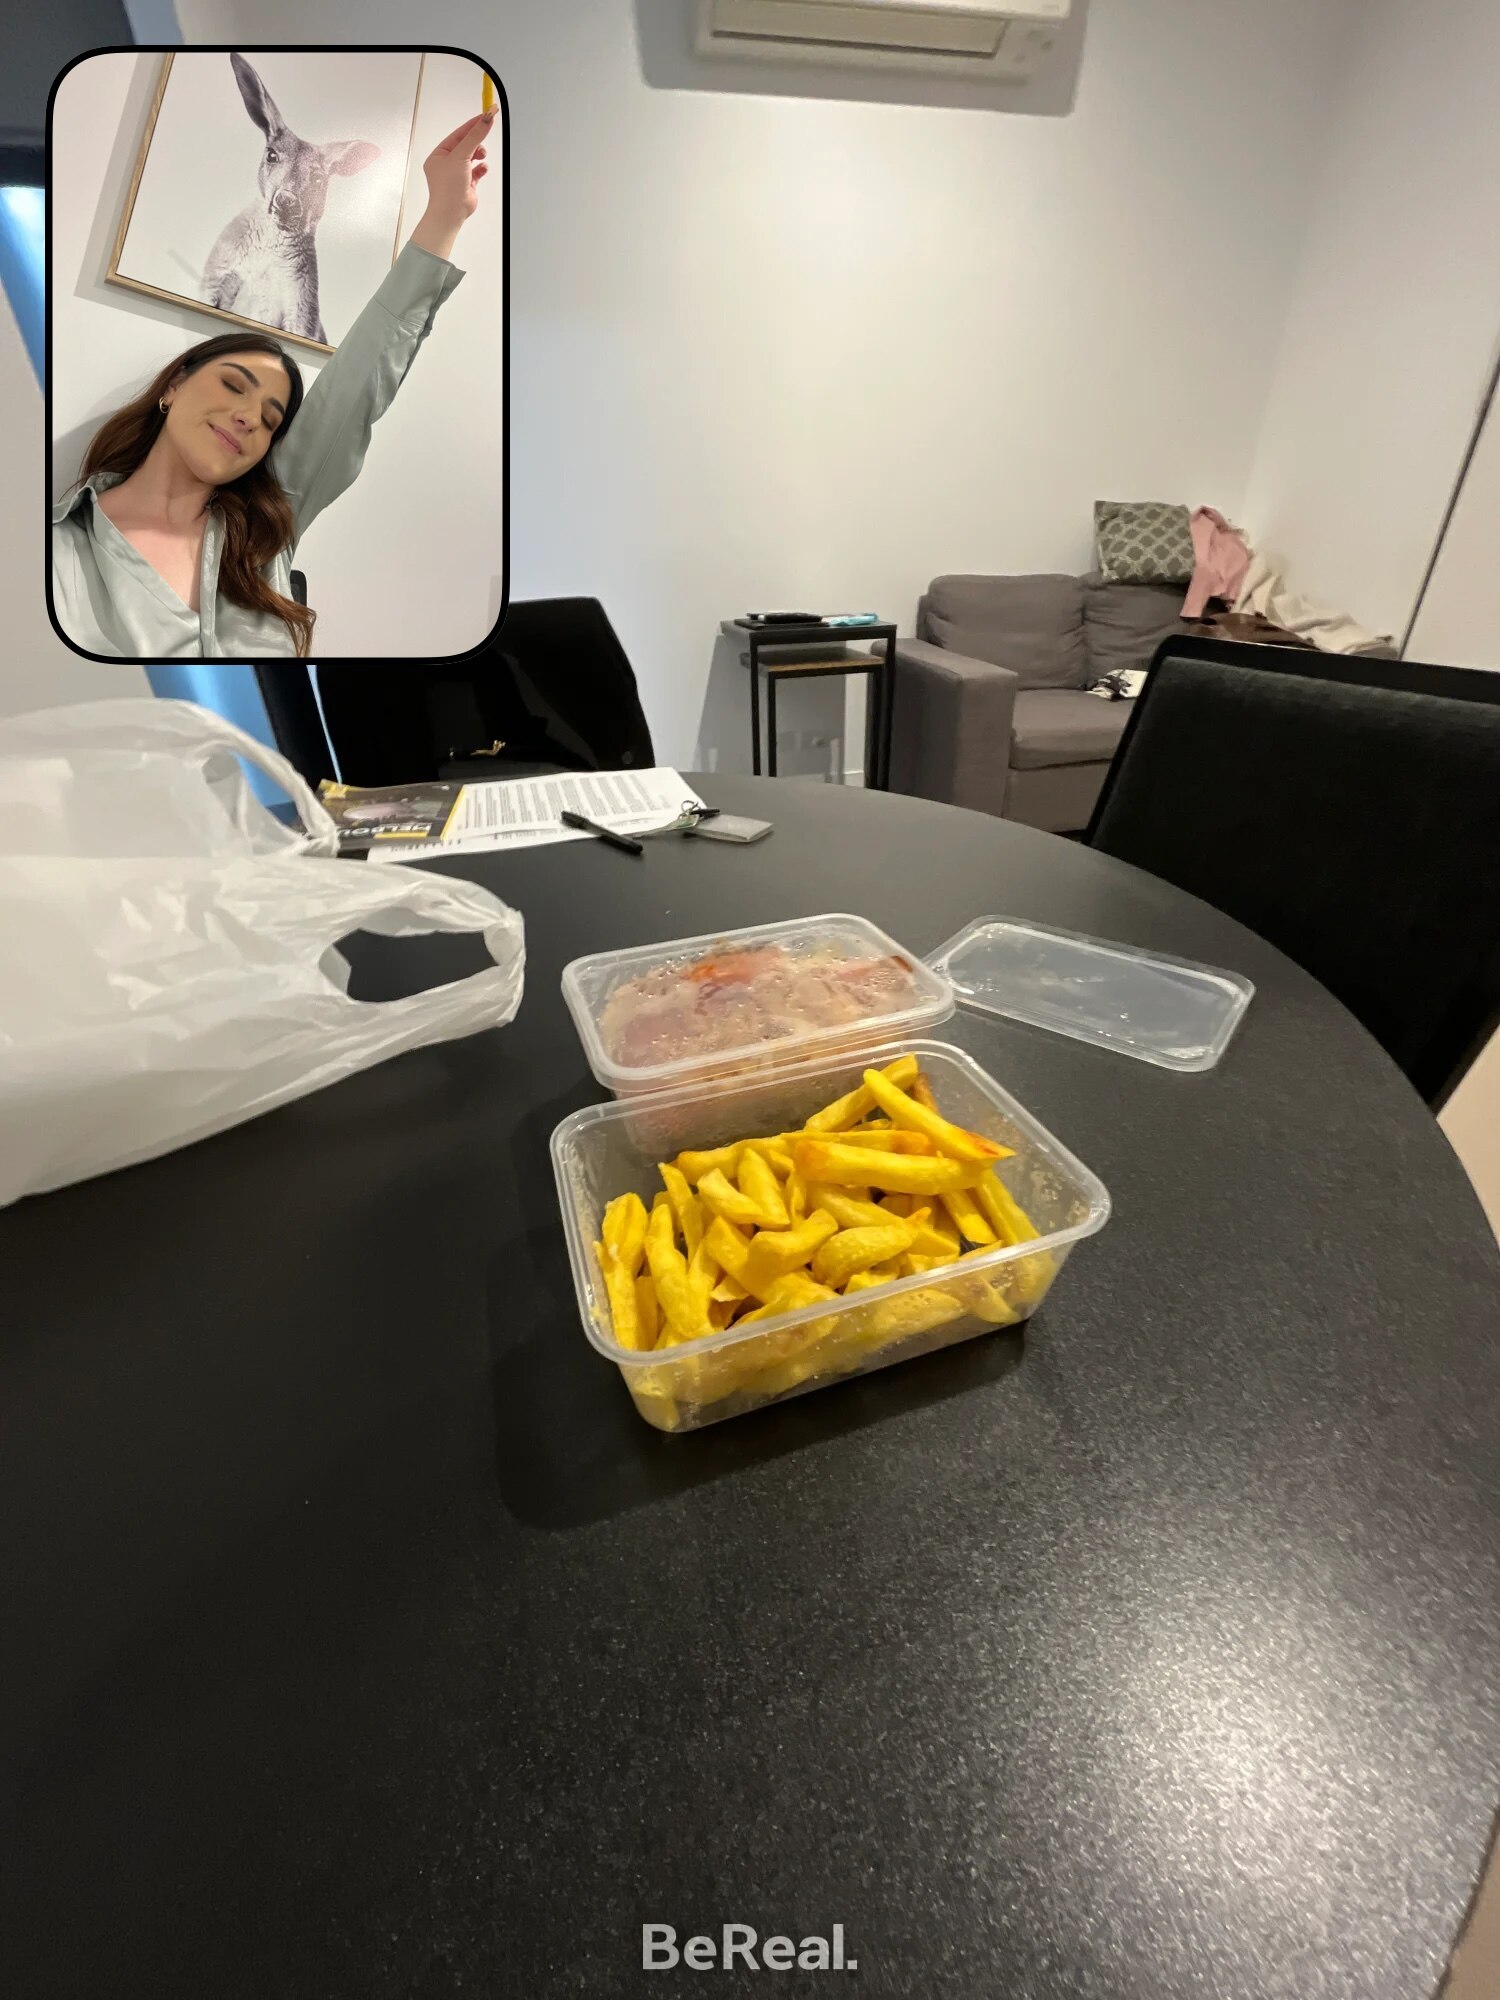 Screenshot of BeReal app, showing a room with takeaway food containers on a table, embedded with a selfie of a young woman